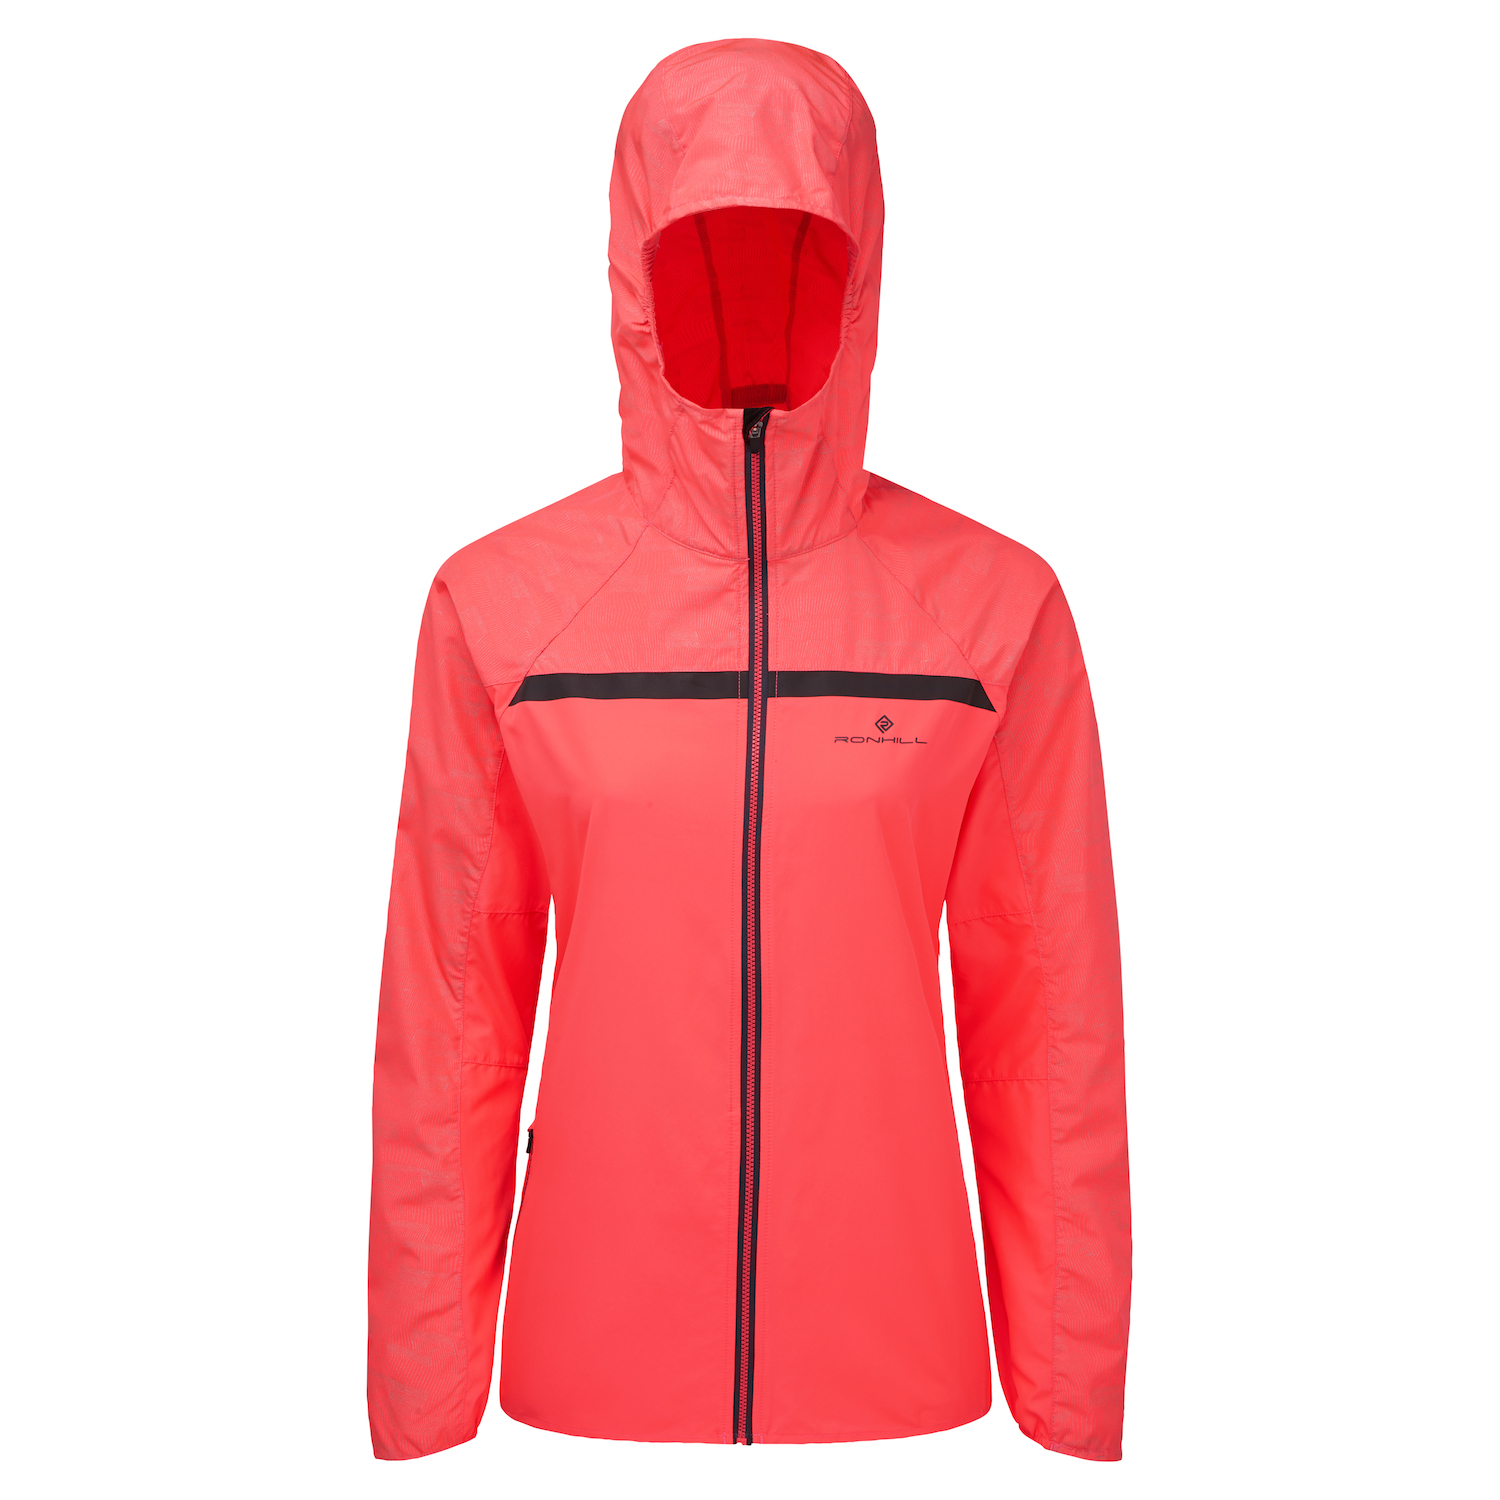 Ronhill Afterlight Jacket